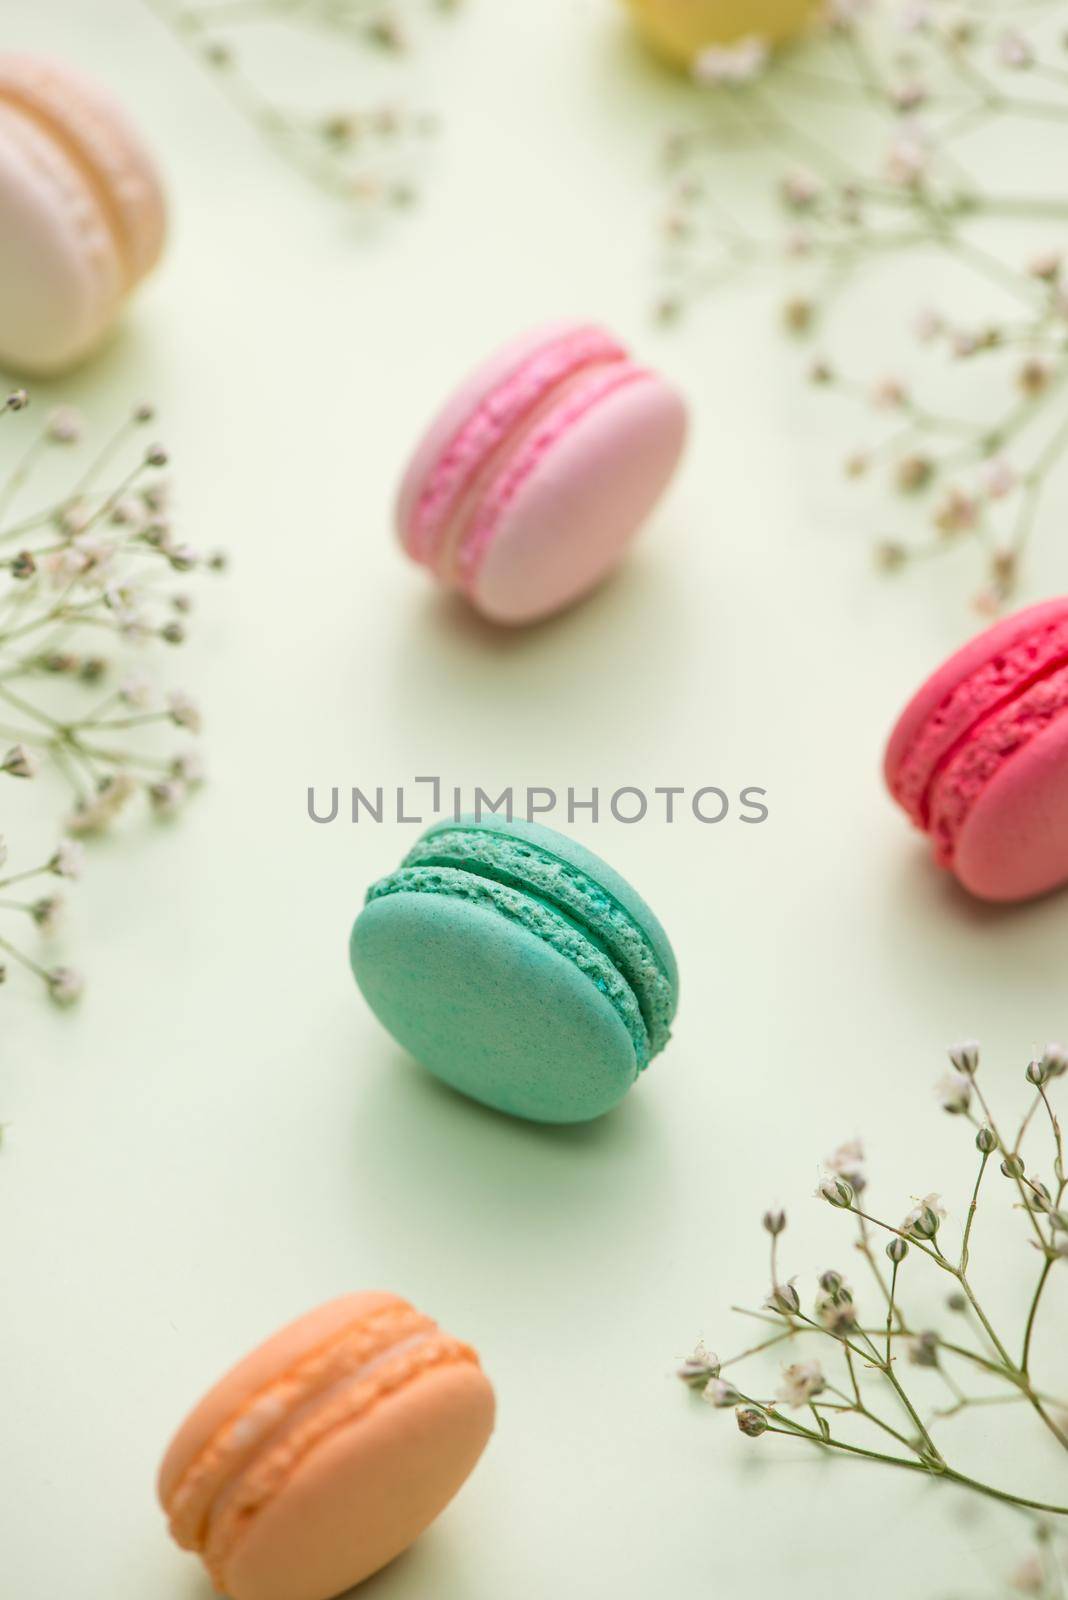 Dessert. Sweet macarons or macaroons with flowers.